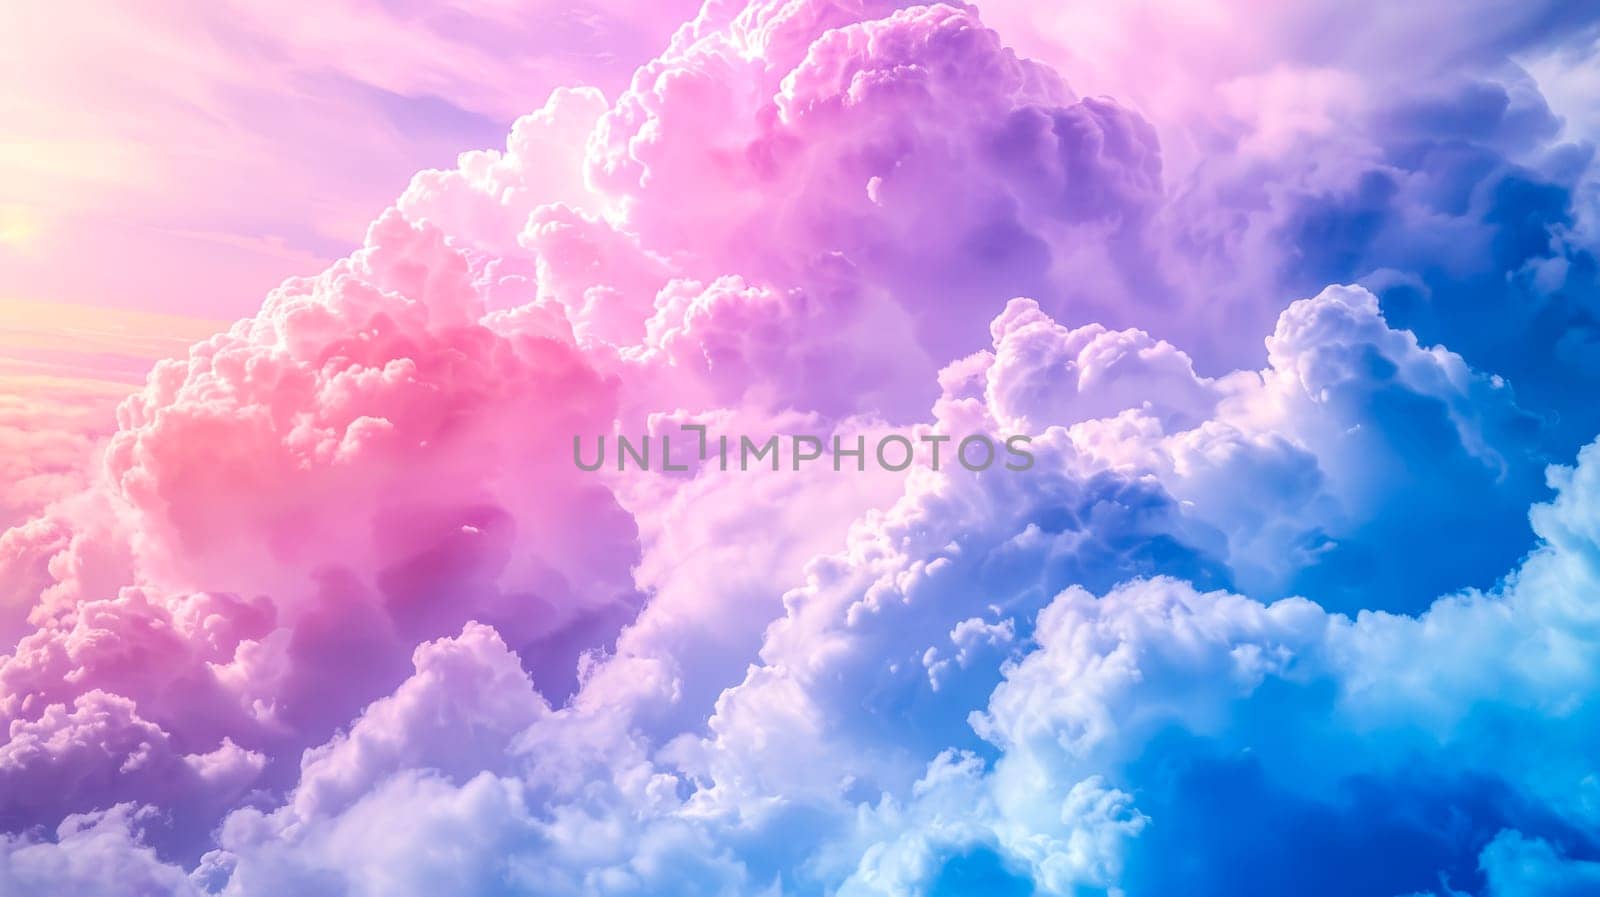 Surreal sky with vibrant clouds at sunset by Edophoto